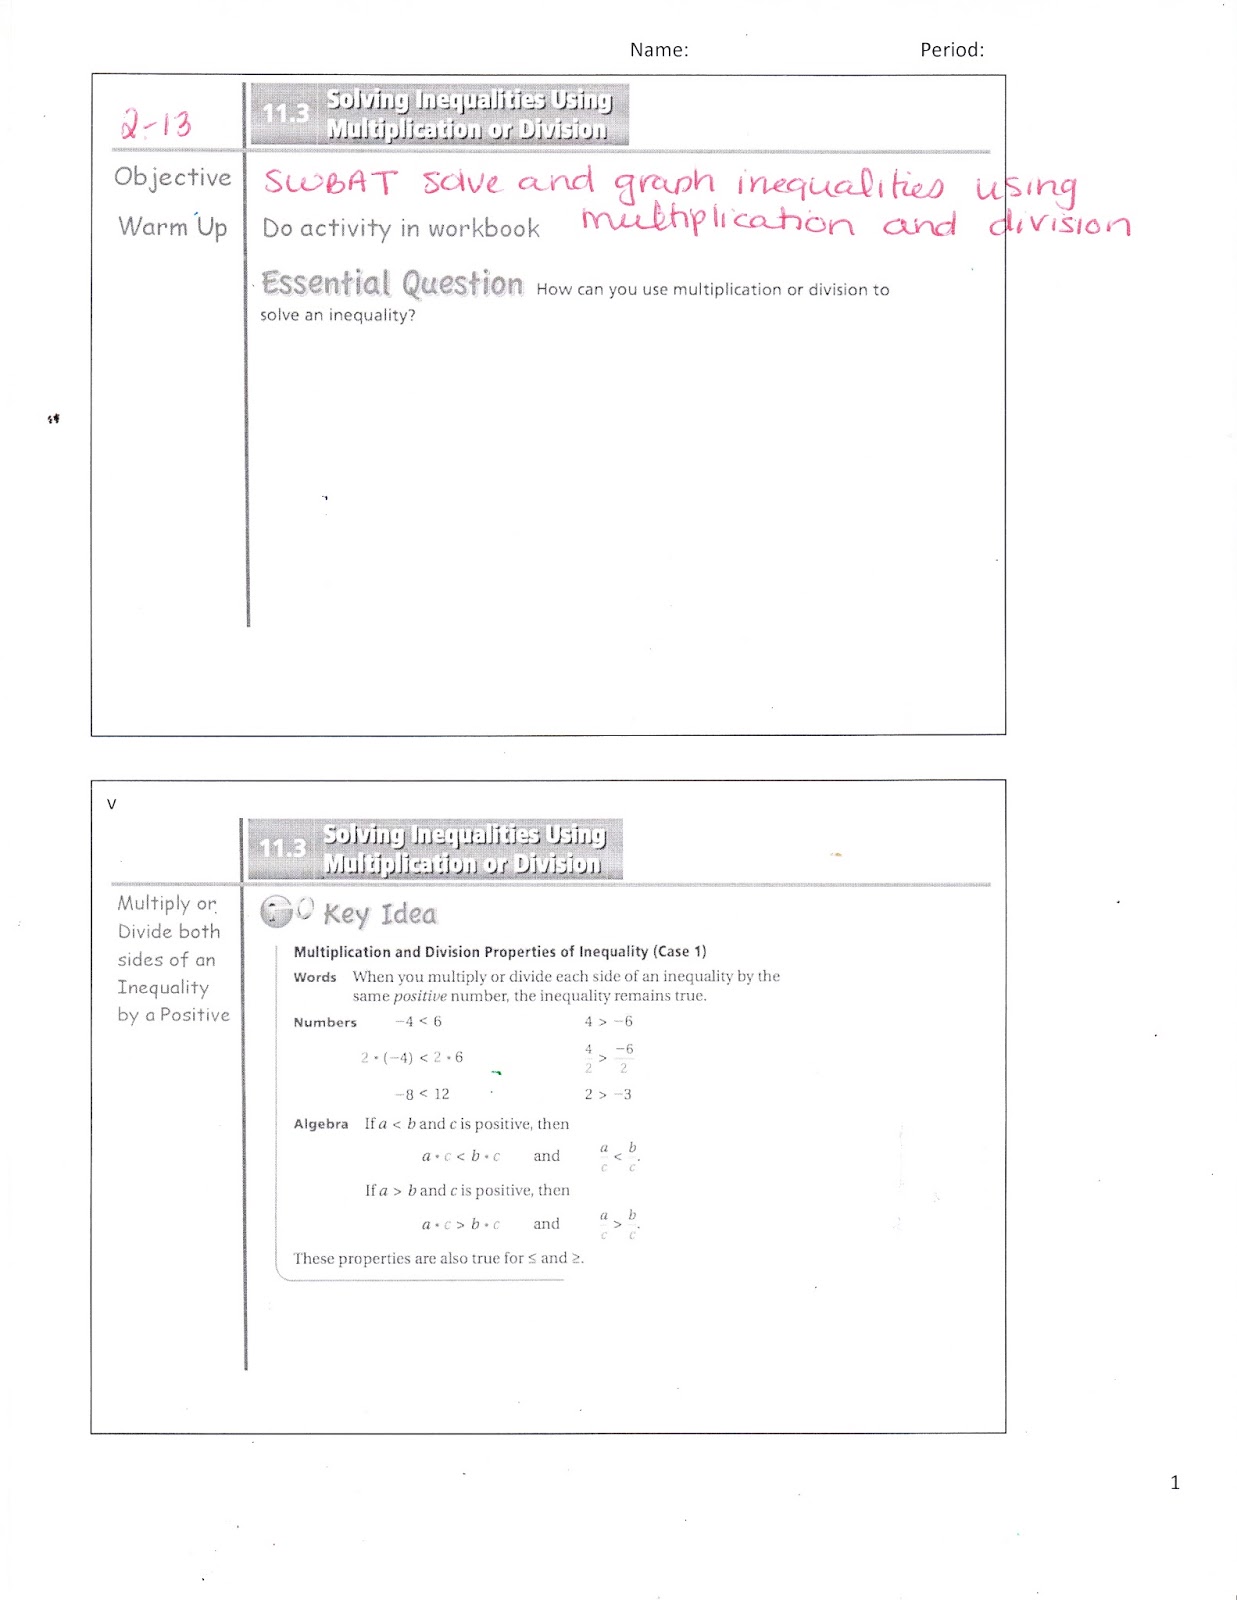 unit-6-5-solving-linear-inequalities-by-using-multiplication-and-division-mr-mart-nez-s